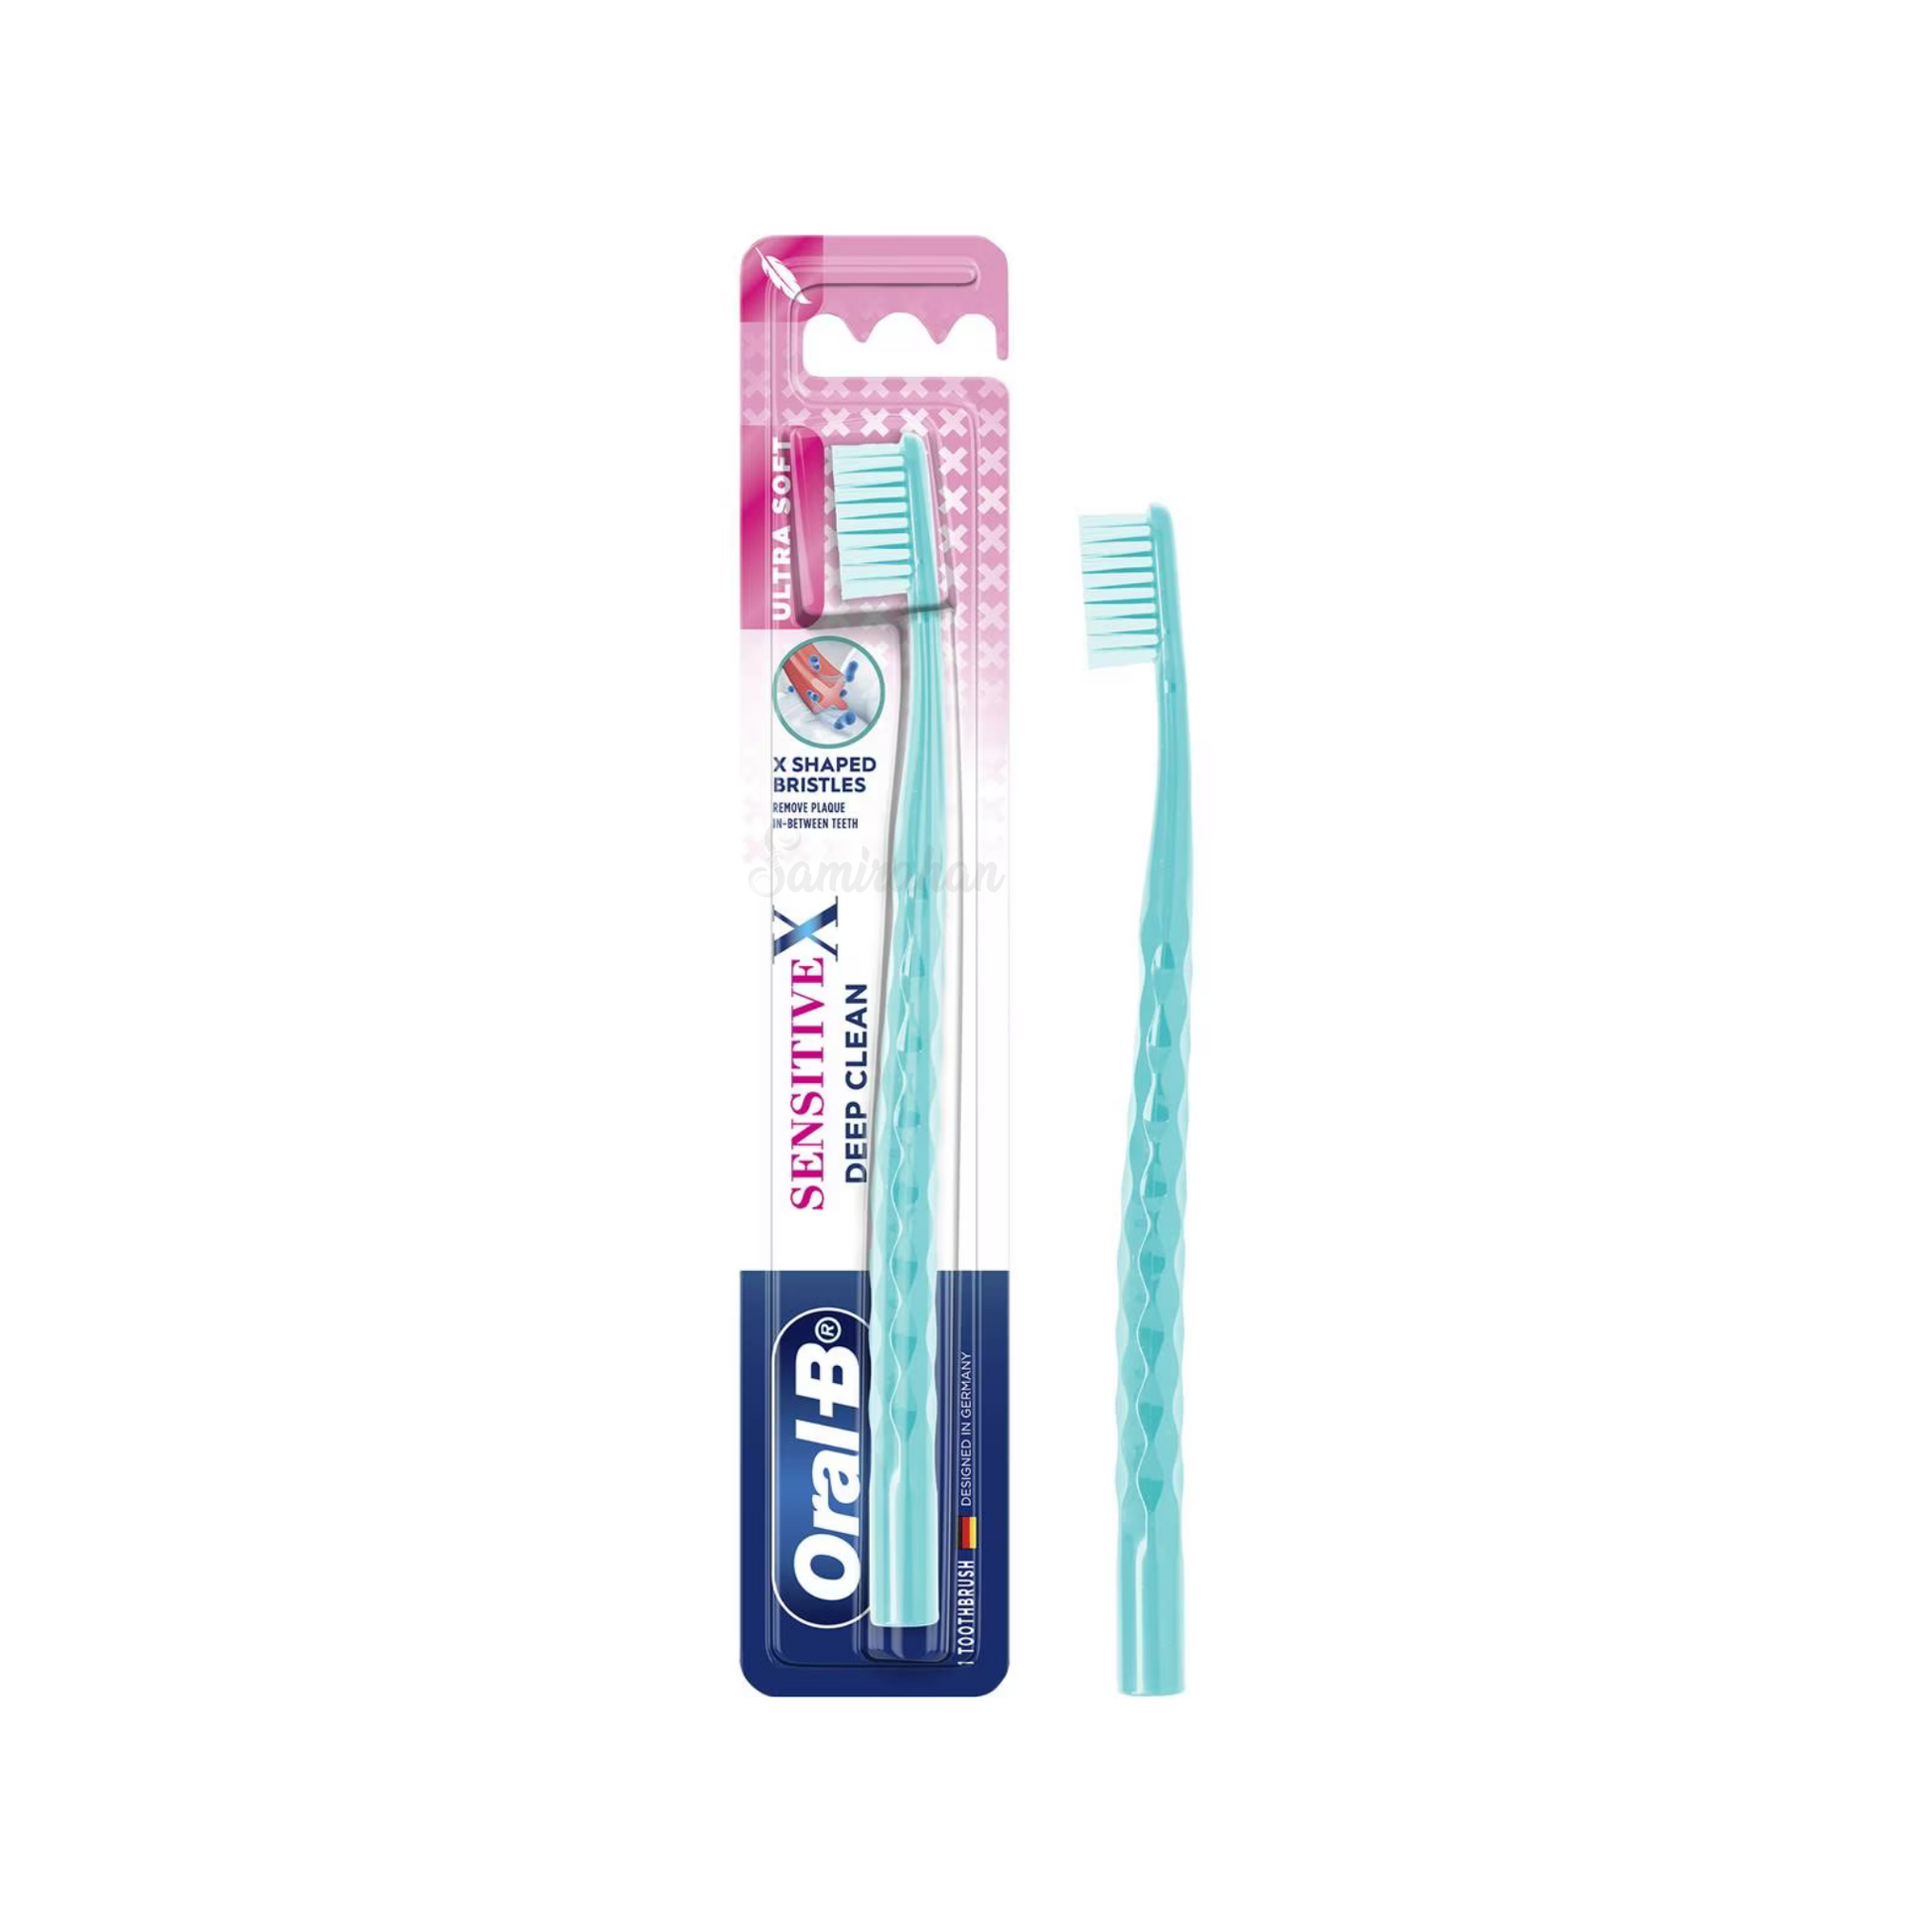 Oral B SensitiveX Deep Clean Toothbrush removes plaque in-between teeth. It has ULTRA SOFT bristles on edges for exceptional softness on gums. Best genuine authentic real imported foreign Australian premium quality adult dental health tooth brush brushing gum healthy cheap price in Dhaka Chittagong Bangladesh.